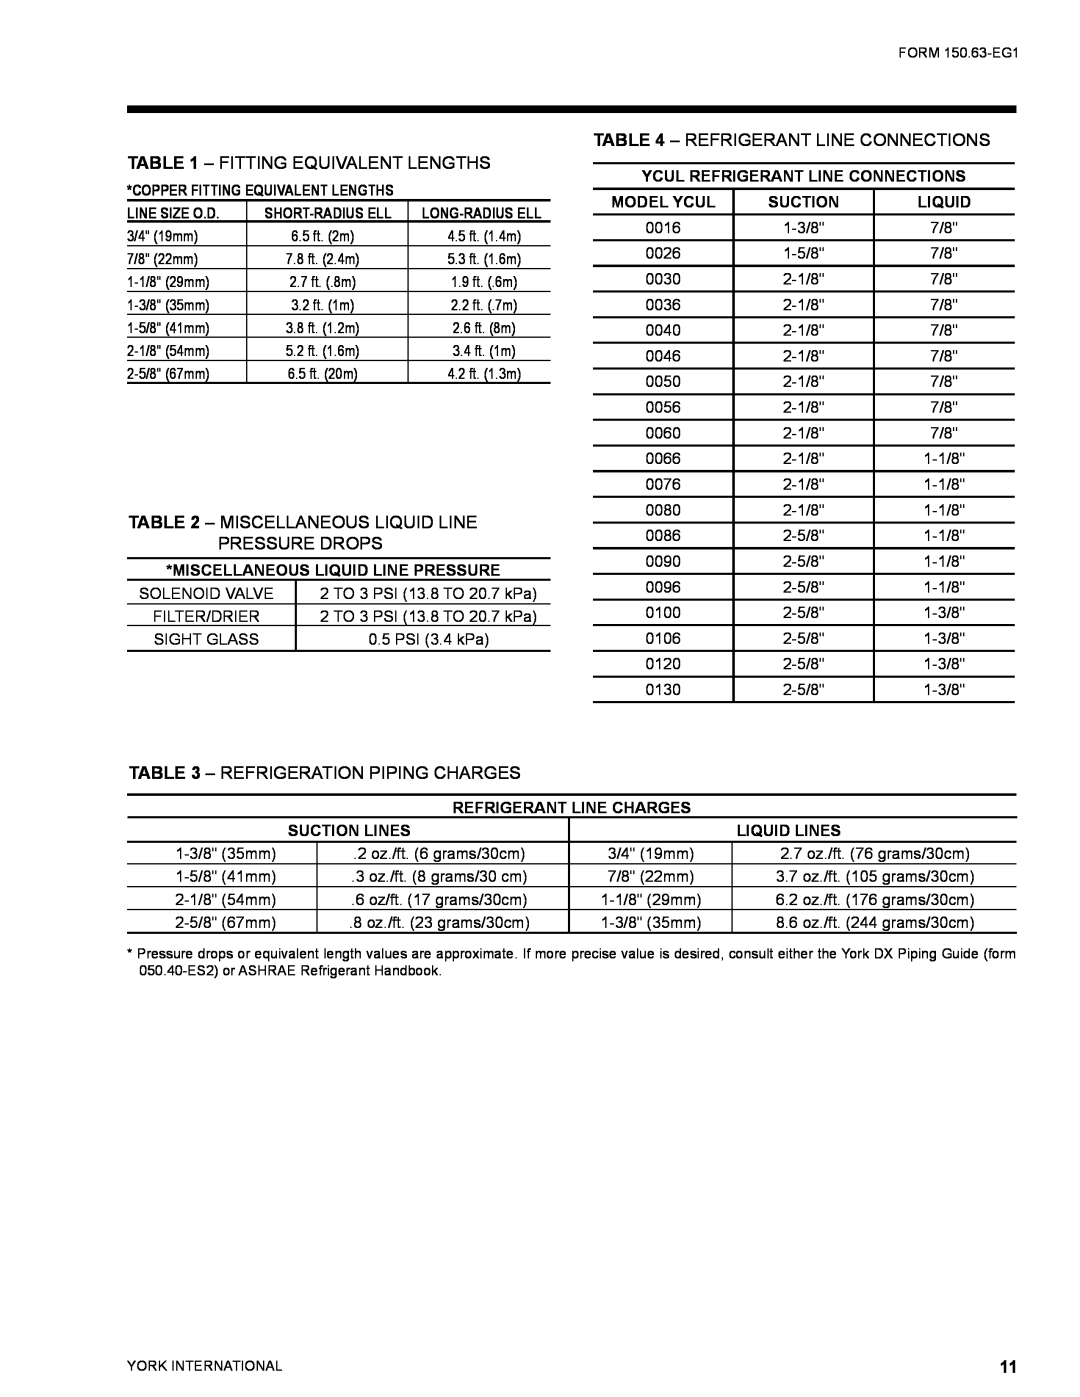 York YCUL0016 manual Fitting Equivalent Lengths, Miscellaneous Liquid Line, Pressure Drops, Refrigerant Line Connections 